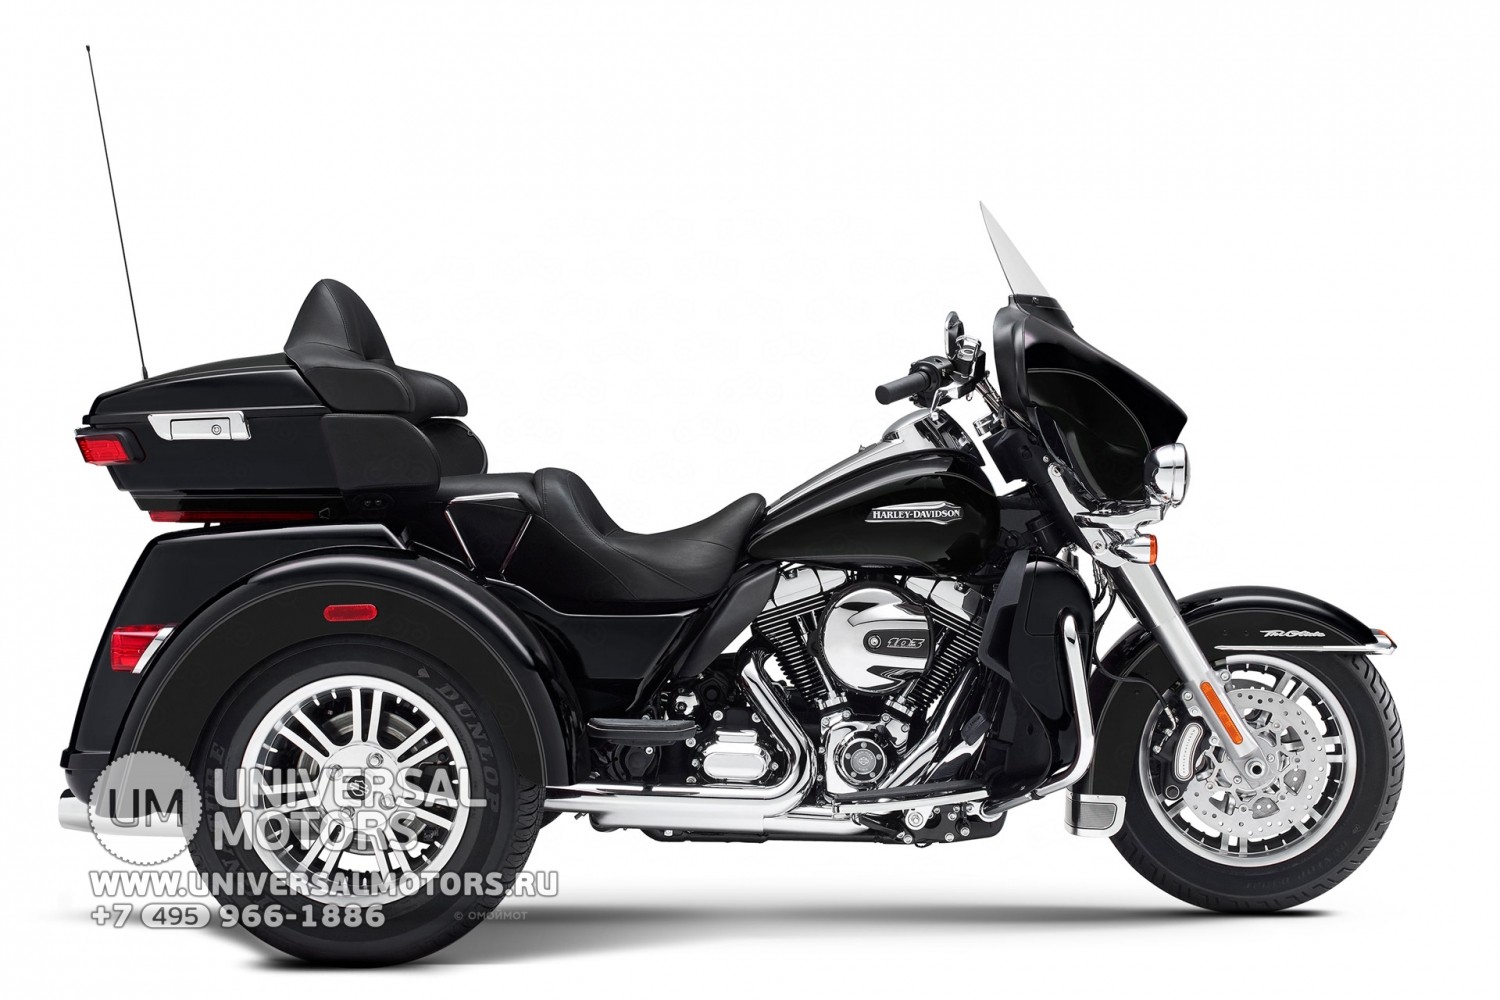 2021 harley davidson tri glide ultra [specs, features, photos] | wbw